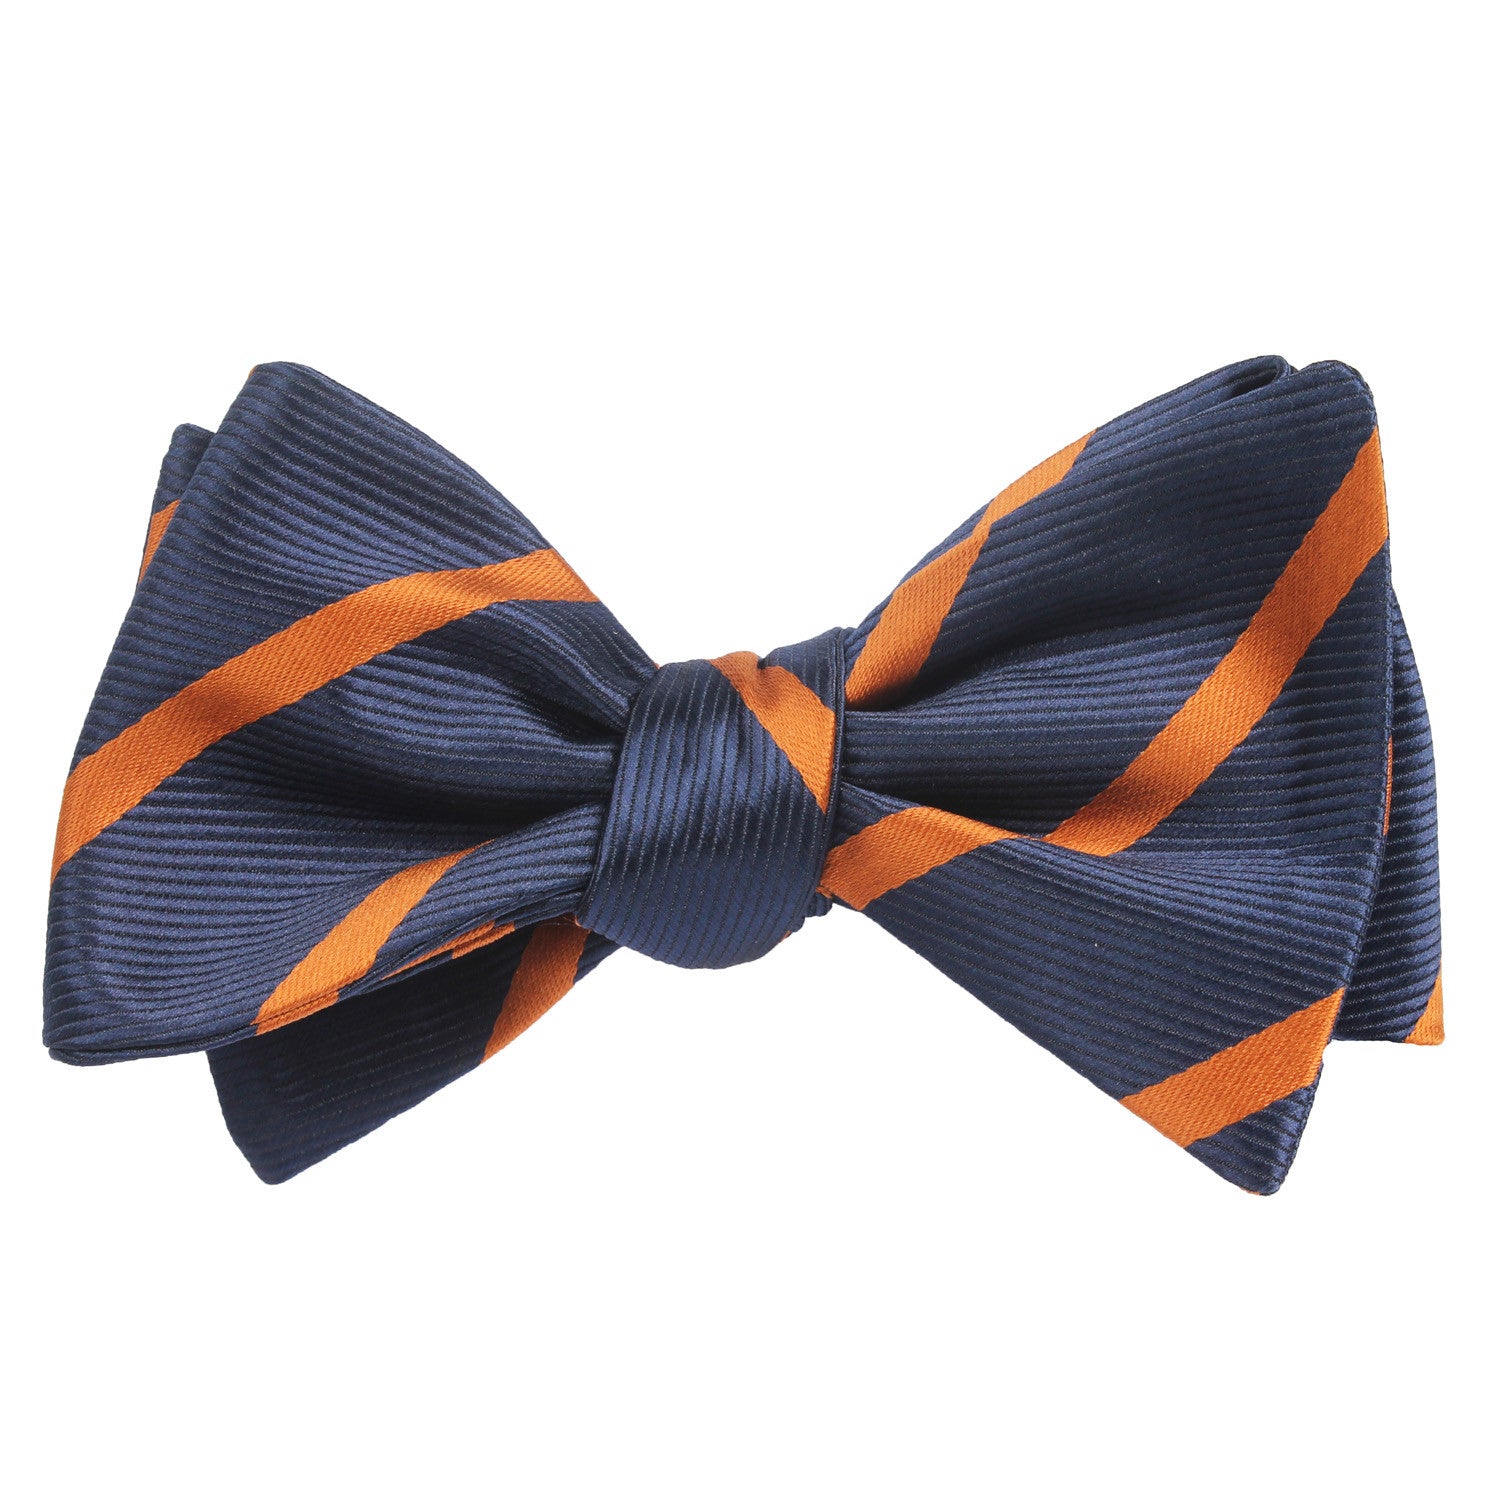 Navy Blue Bow Tie Untied with Striped Brown